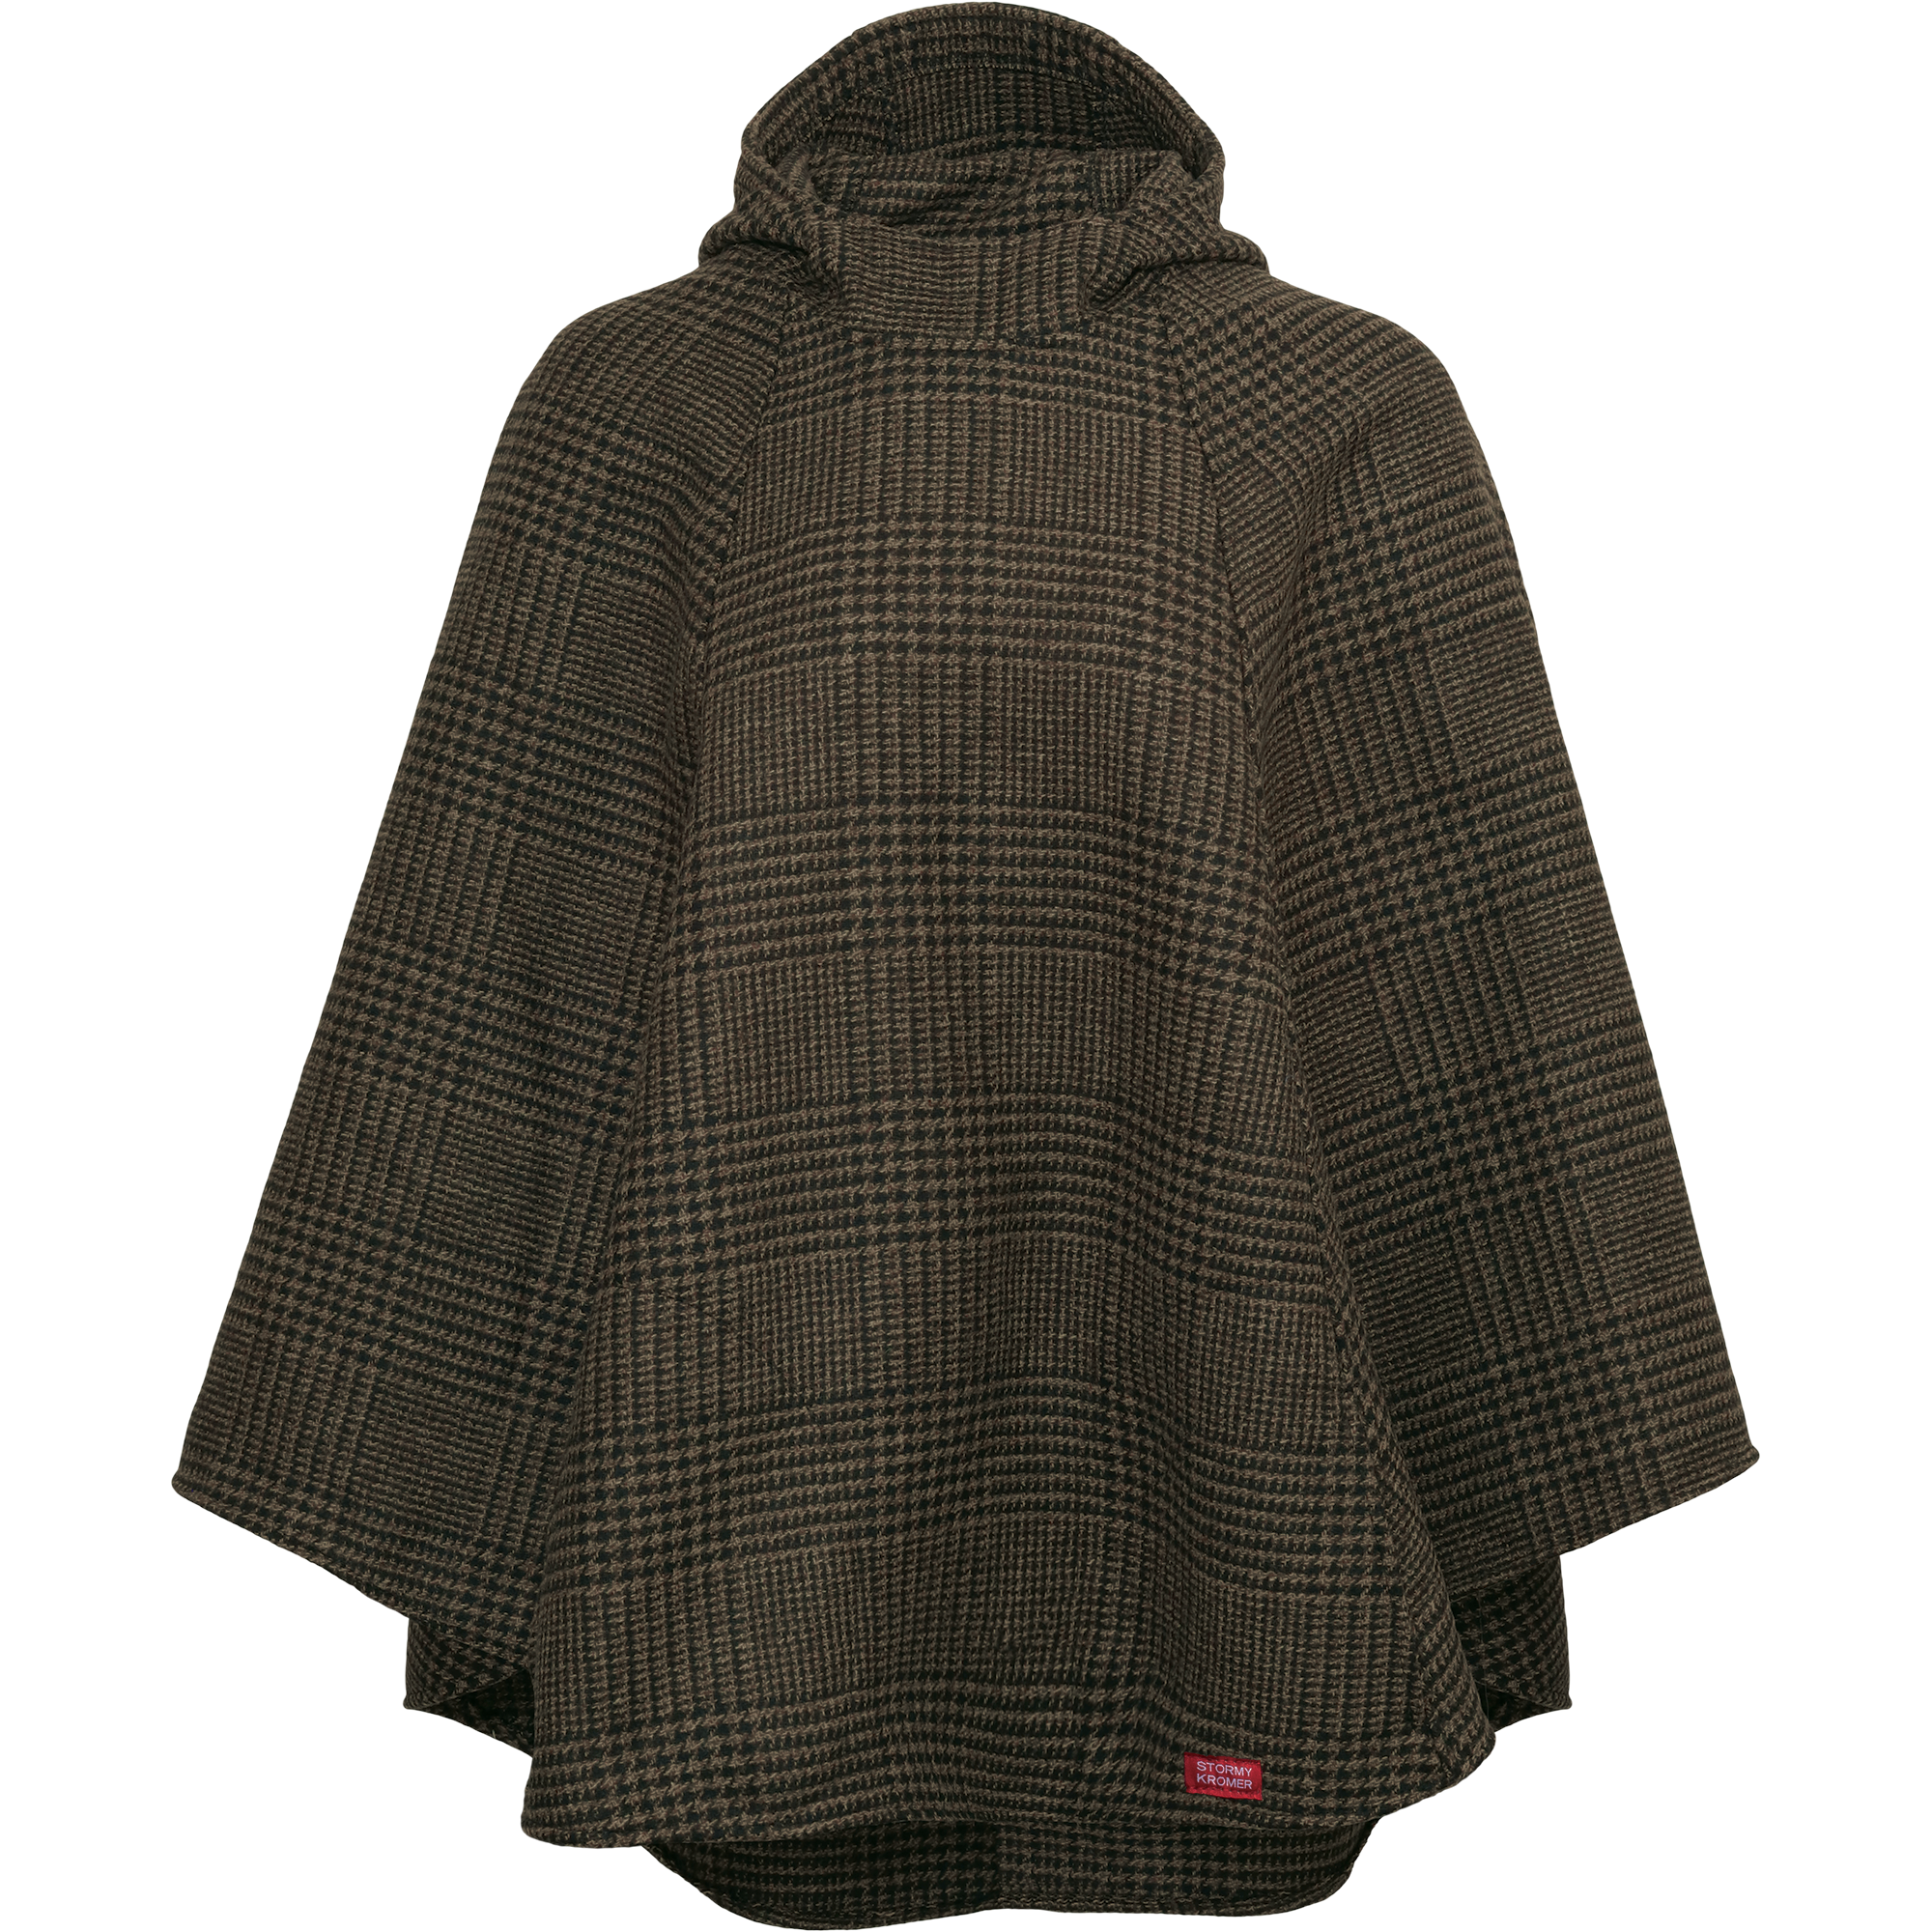 Picture of Stormy Kromer 53480 Saturday Poncho